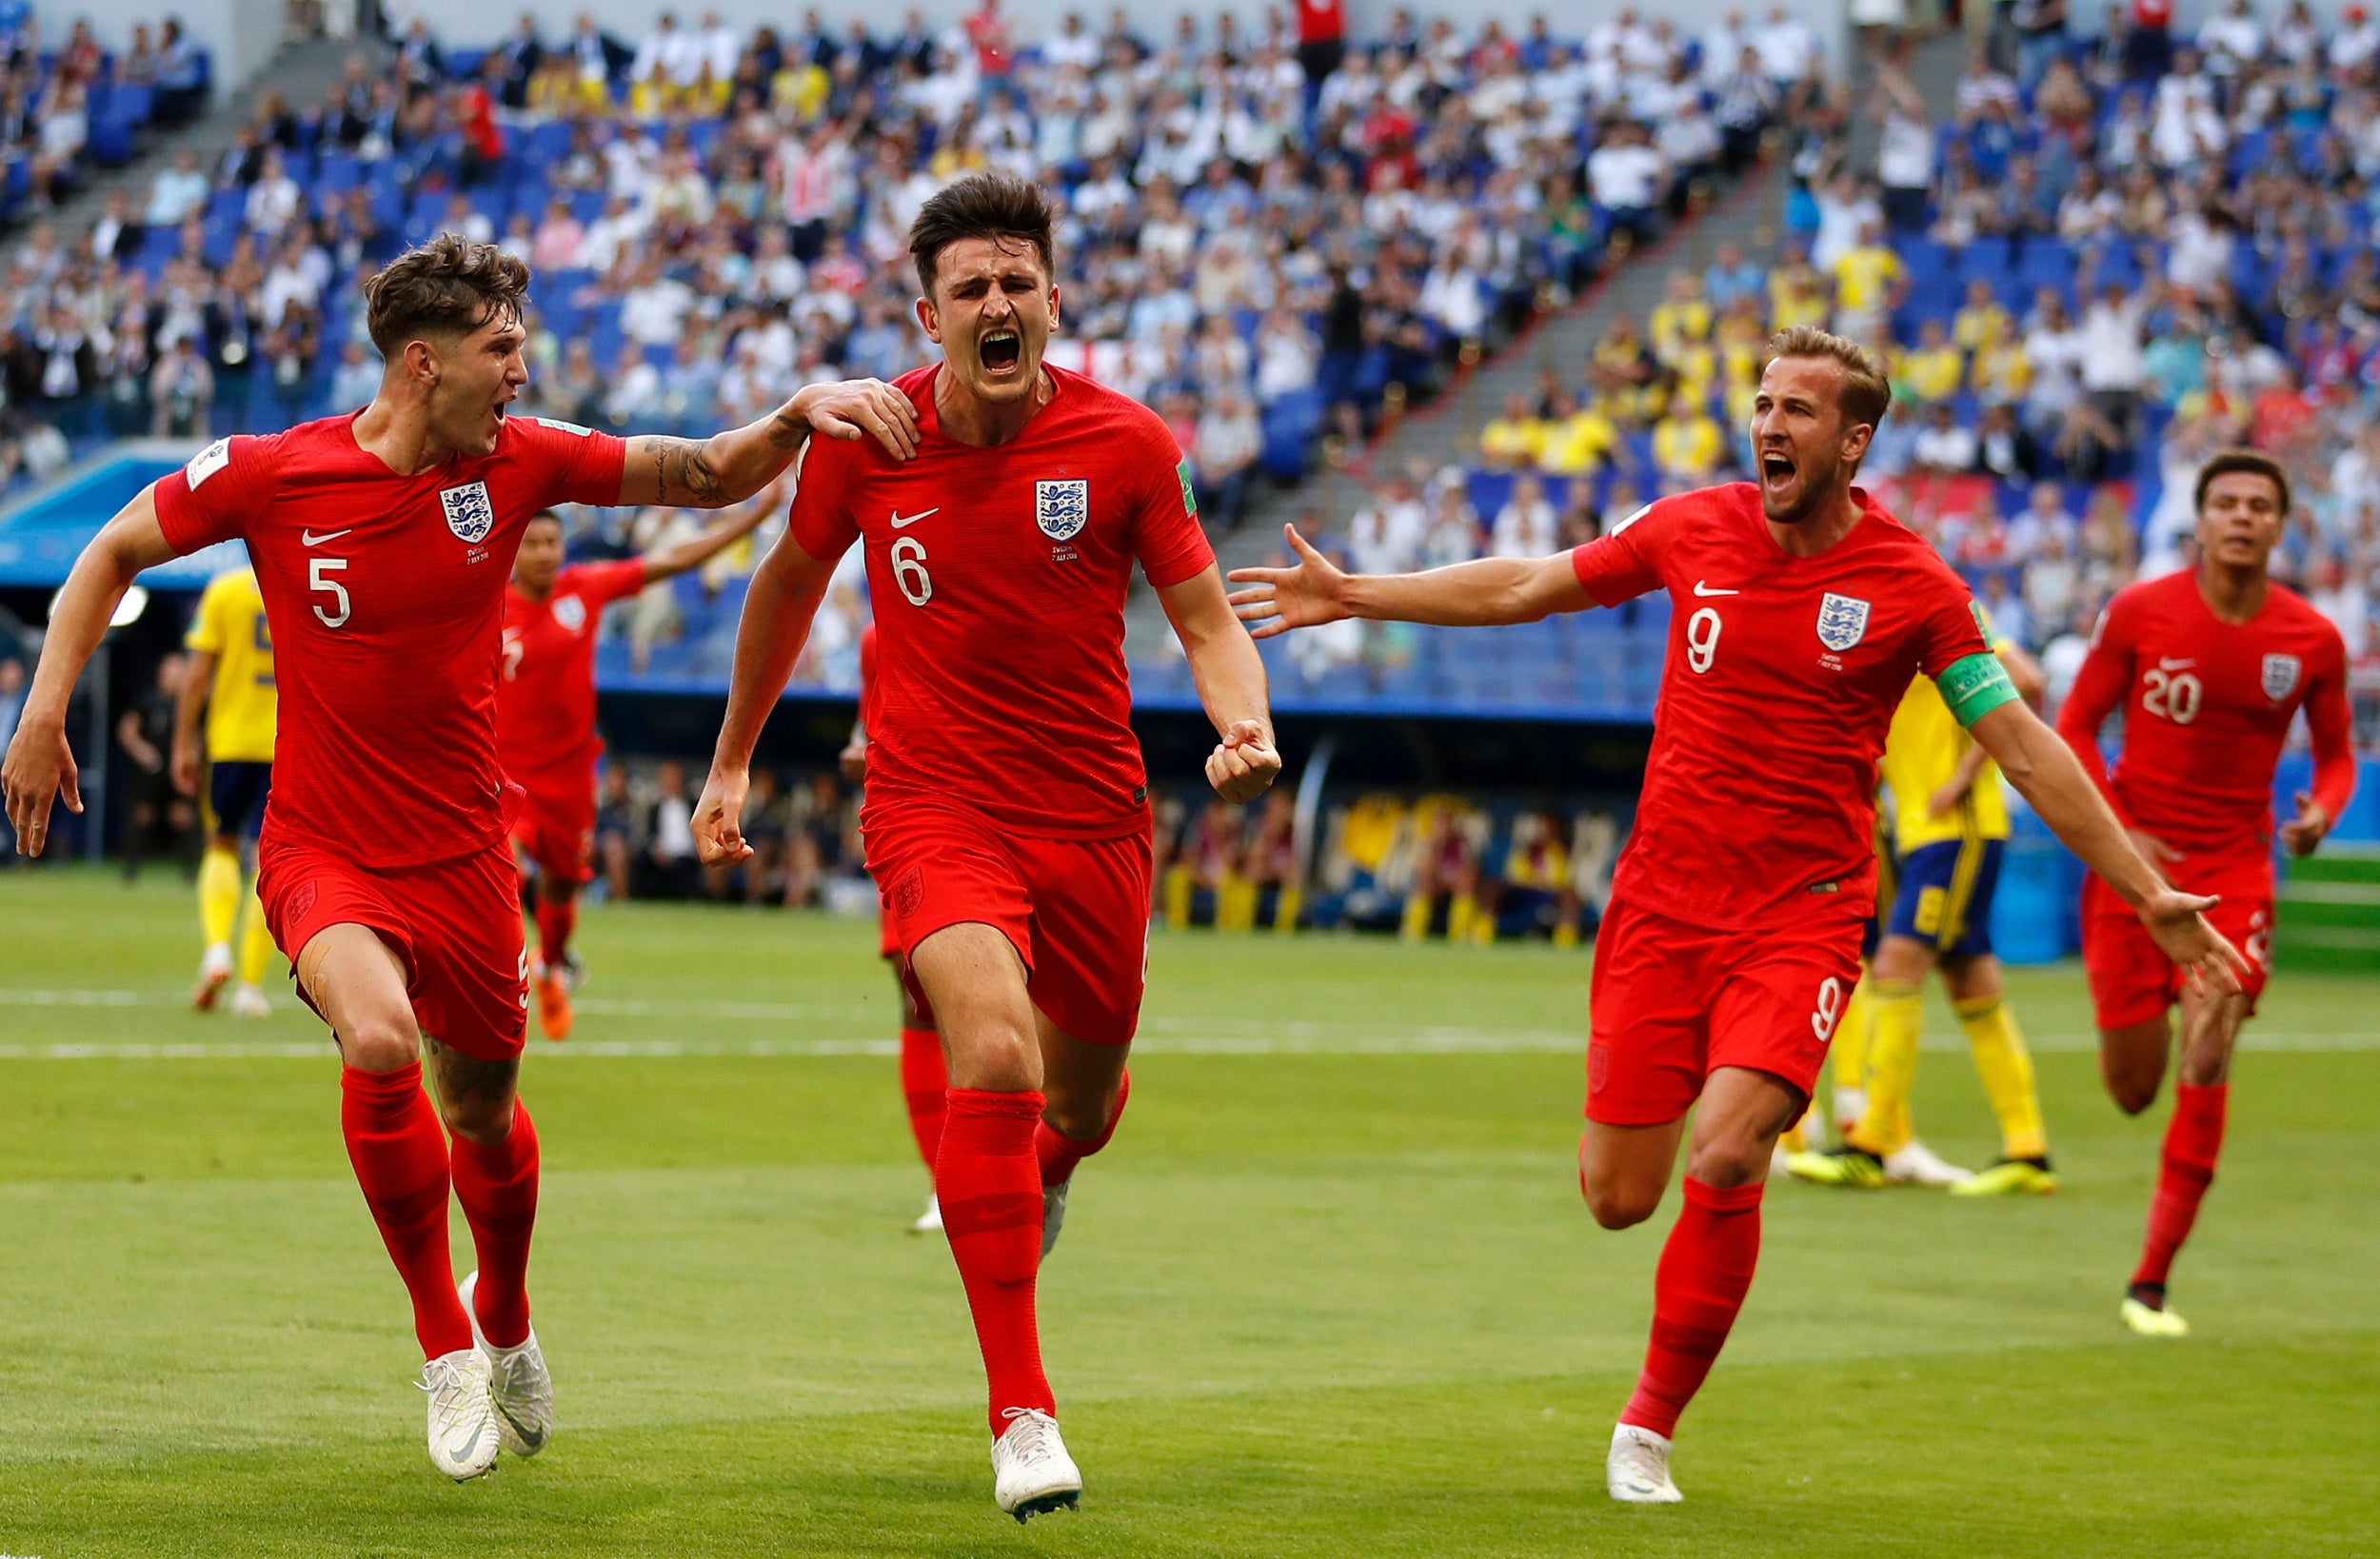 Maguire impressed at the World Cup